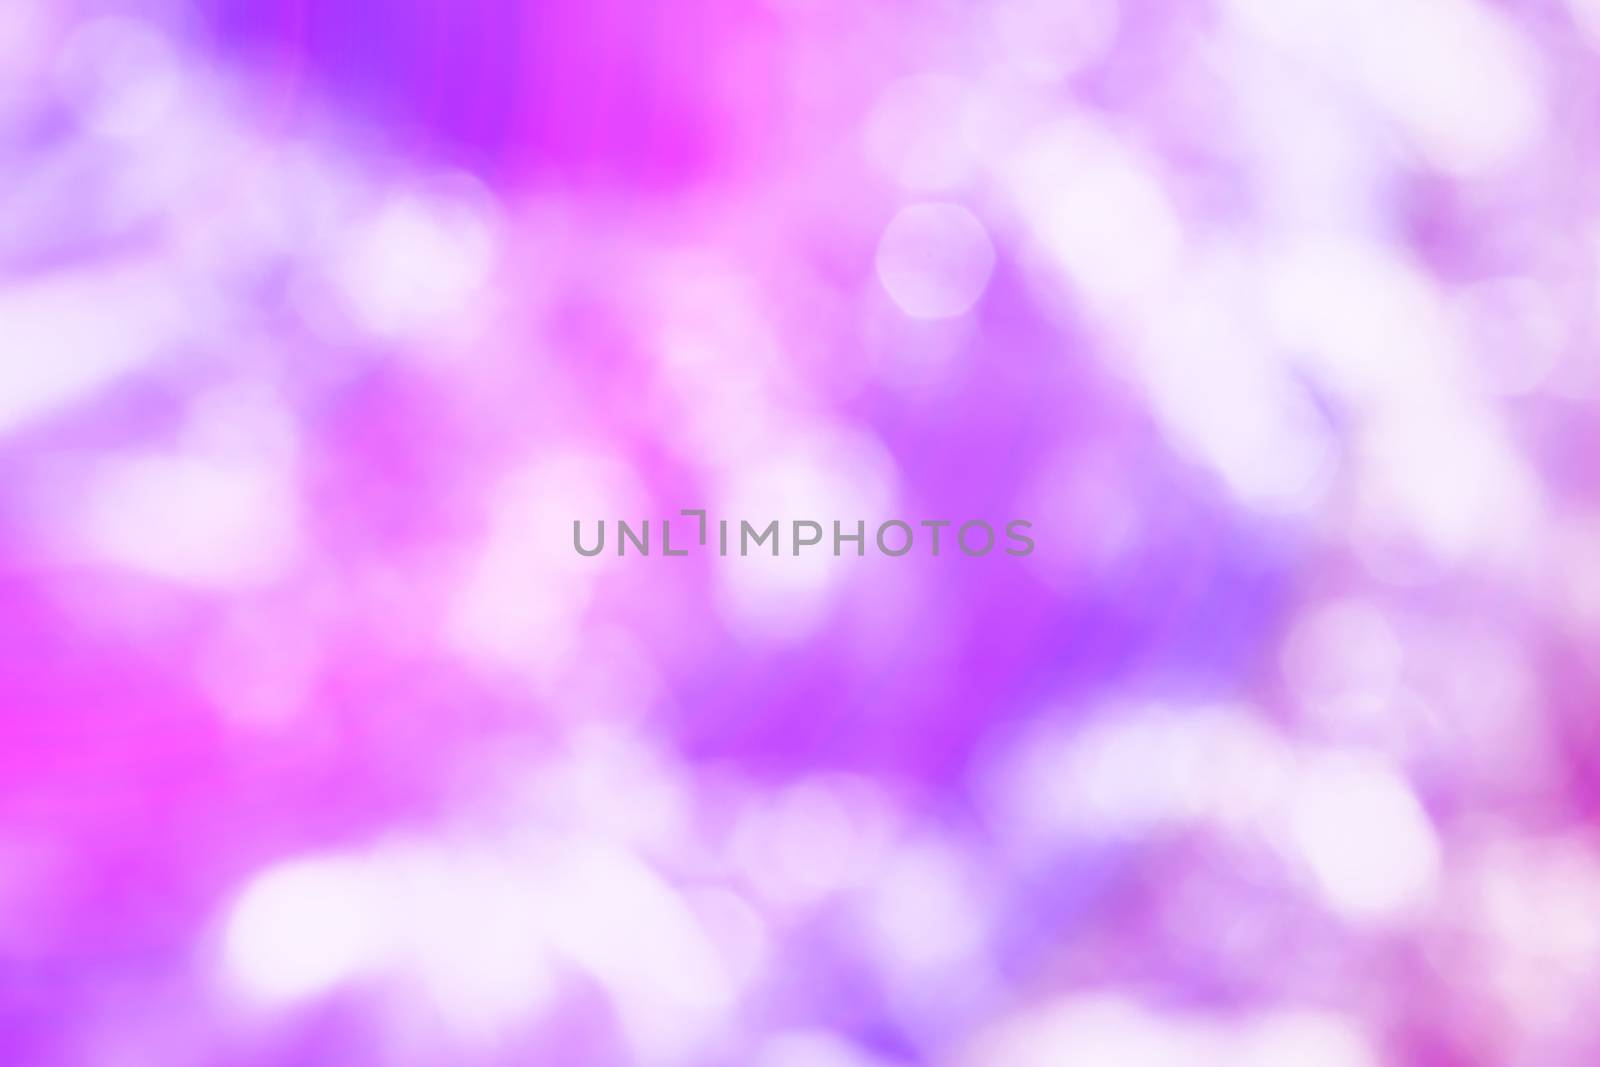 Bokeh and purple cycle color background